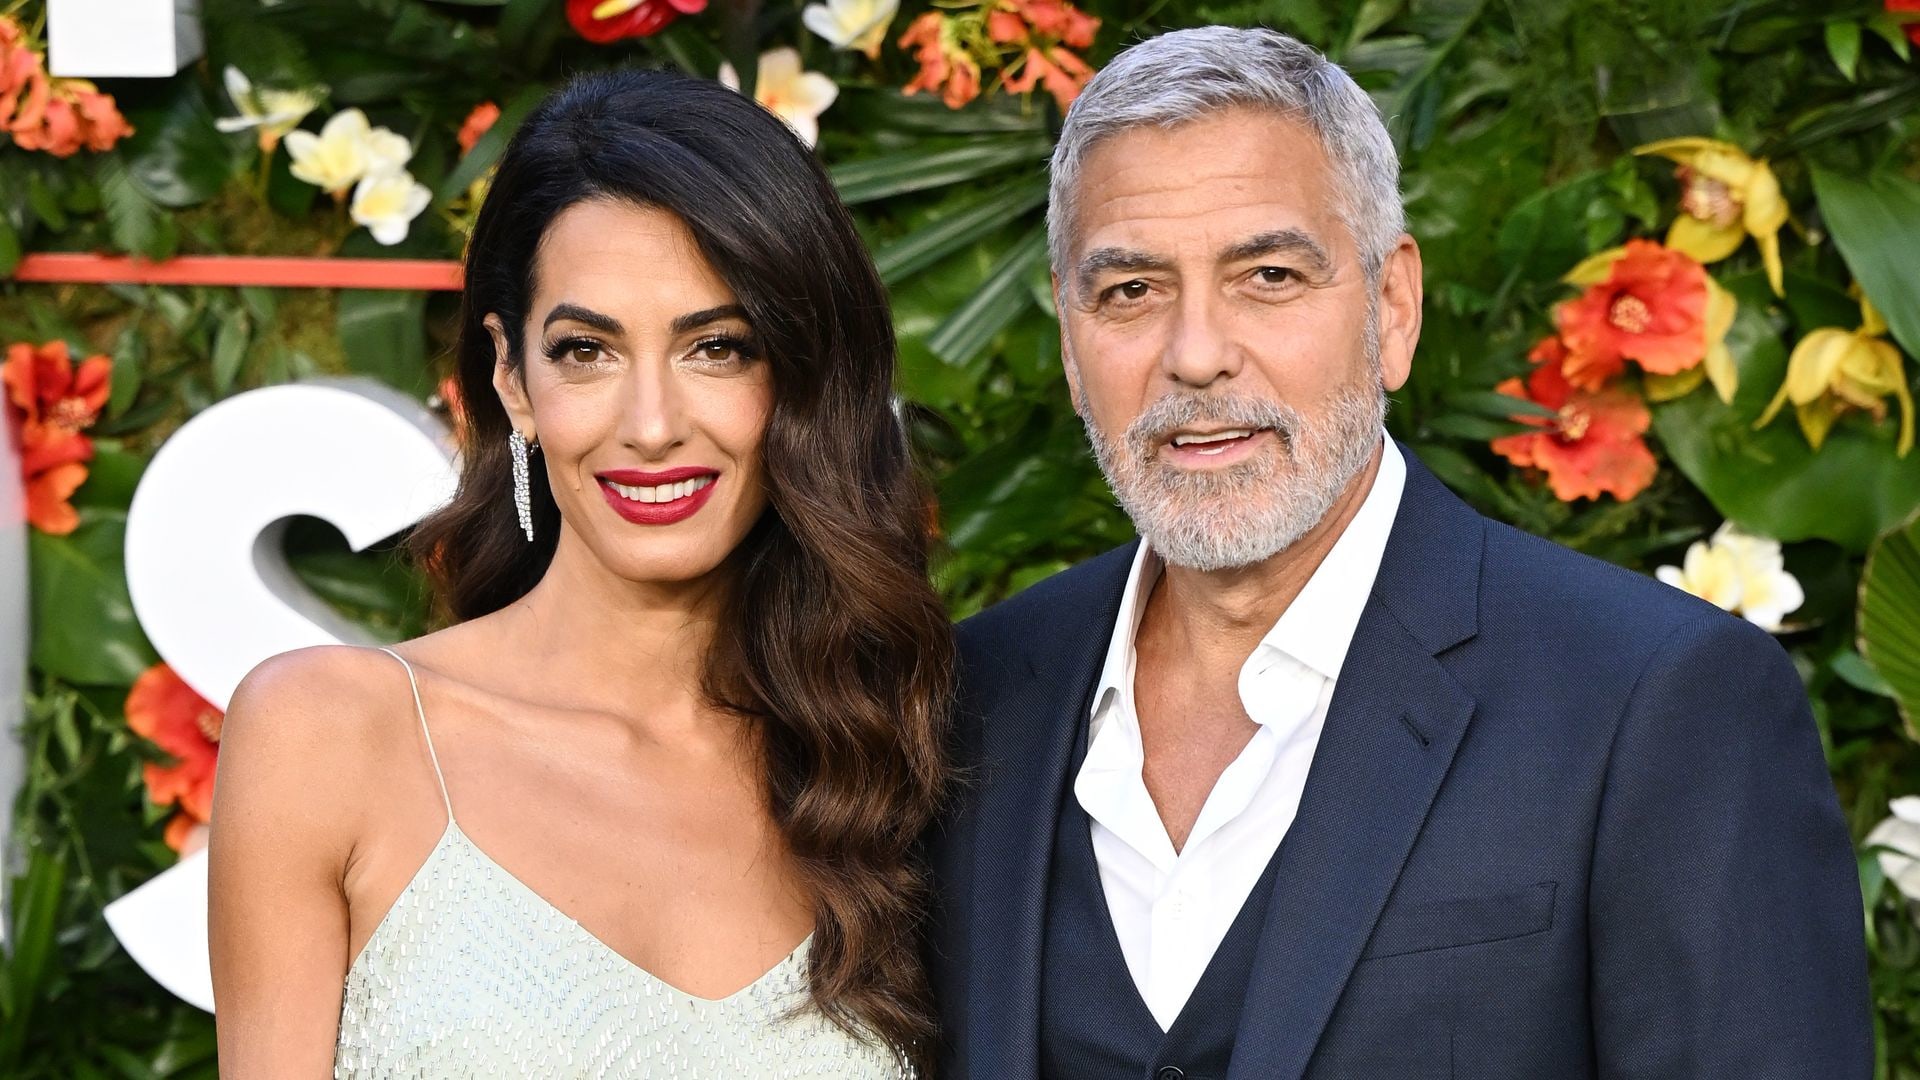 Amal Clooney and George Clooney attend the "Ticket To Paradise" World Film Premiere 